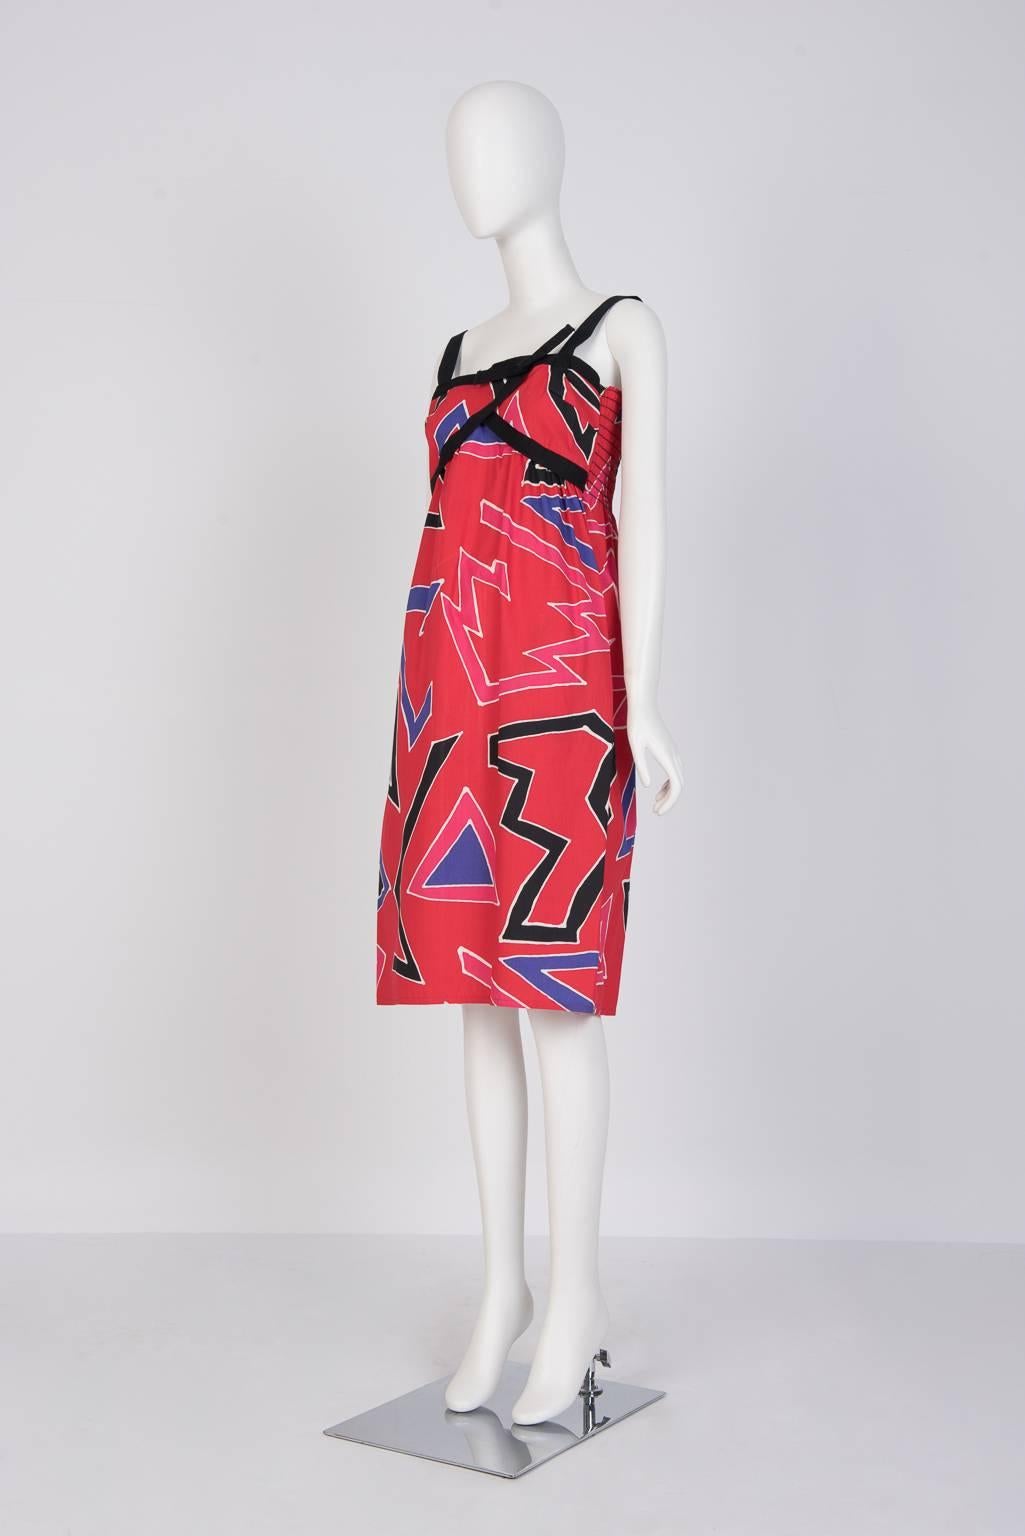 80's graphic print sundress with contrast black shoulder straps that continues around the bodice and smocked back detail